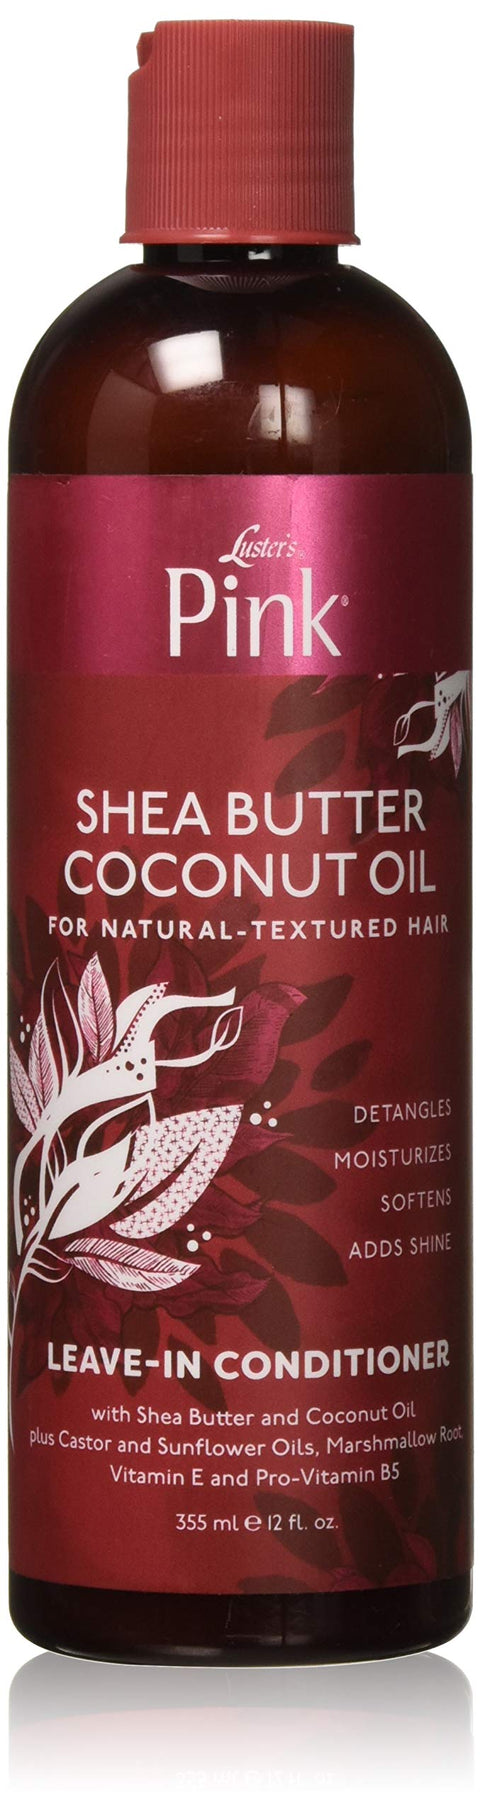 Luster Pink Shea Butter Coconut Oil Leave-In Conditioner  12oz